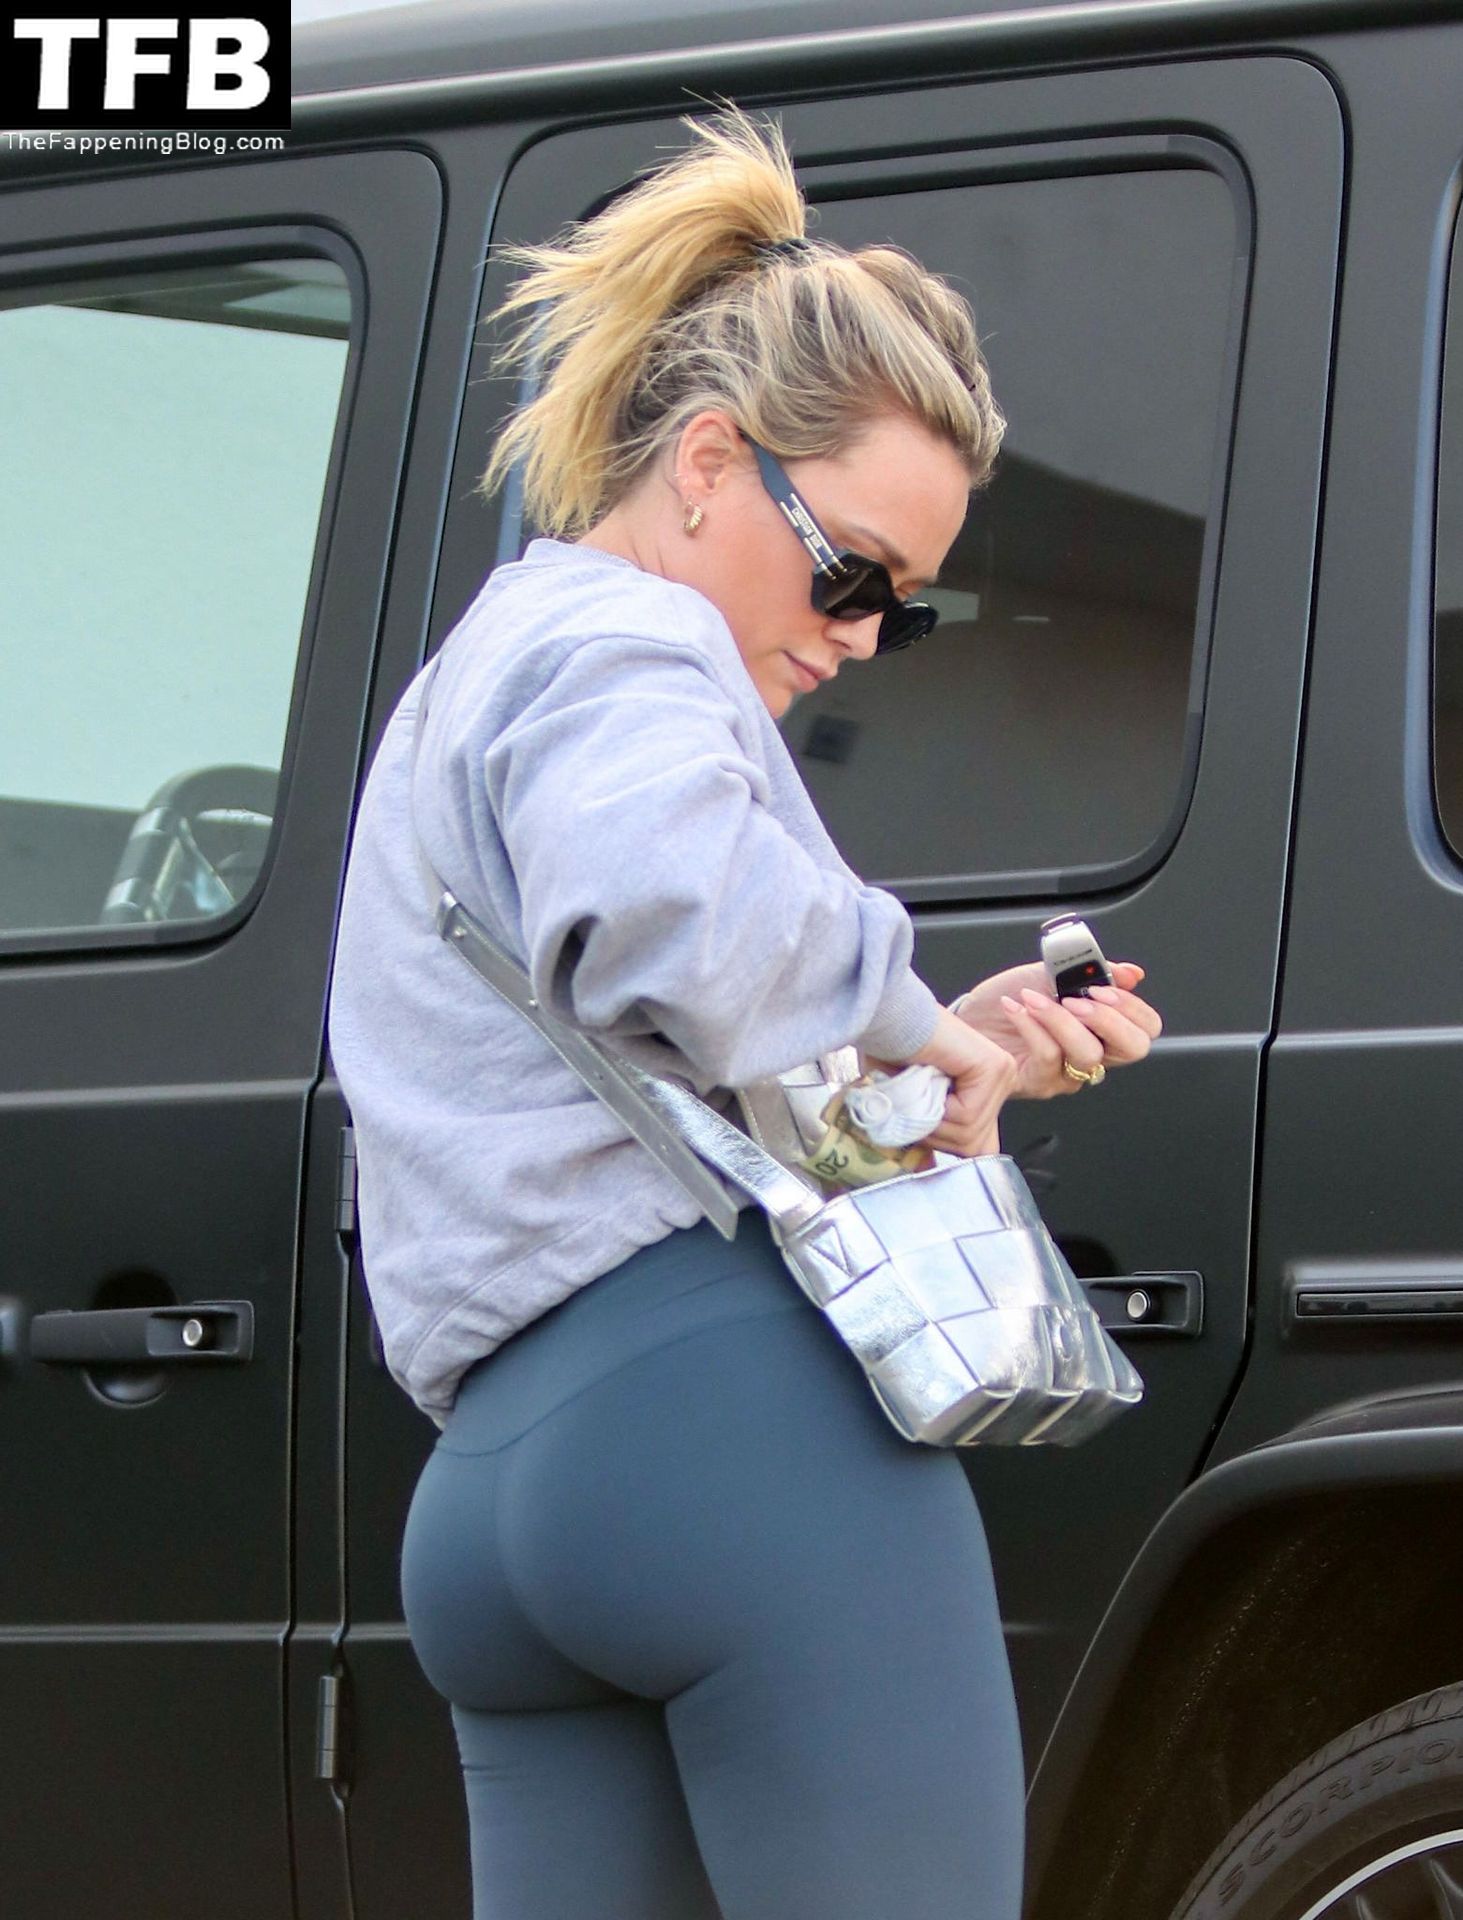 Hilary-Duff-shows-off-impressive-gym-results-in-a-pair-of-skintight-leggings-during-LA-errand-run...-one-day-after-hosting-quaint-Thanksgiving-gathering-at-her-home-The-Fappening-Blog-13.jpg